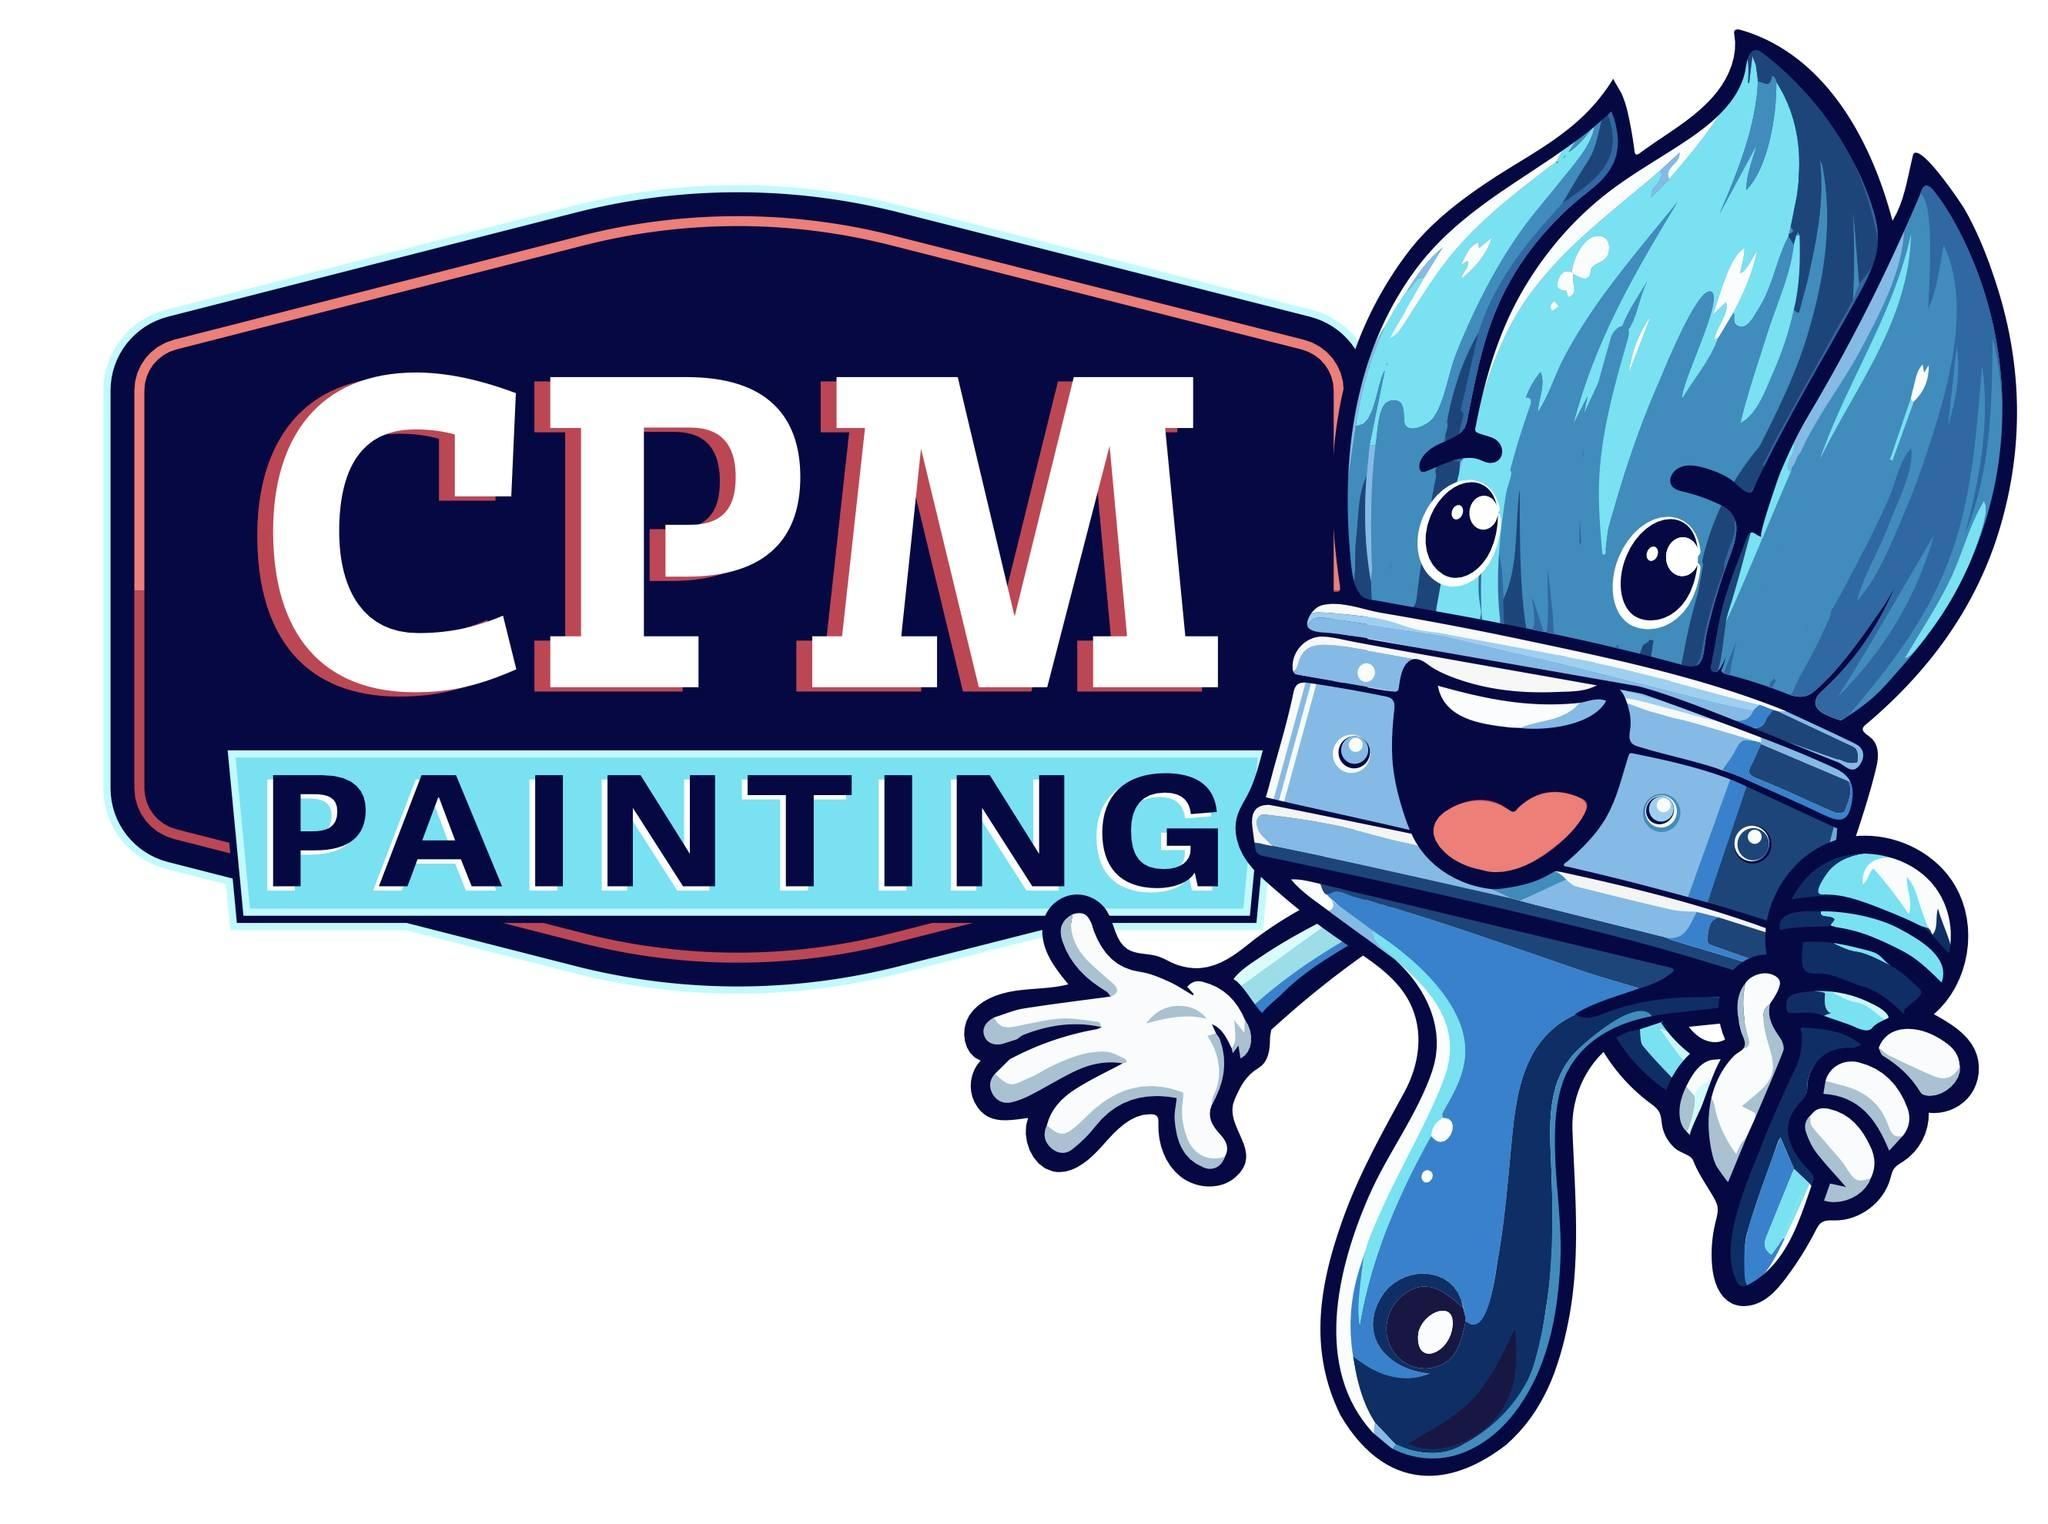  for CPM Painting INC  in Raleigh, NC